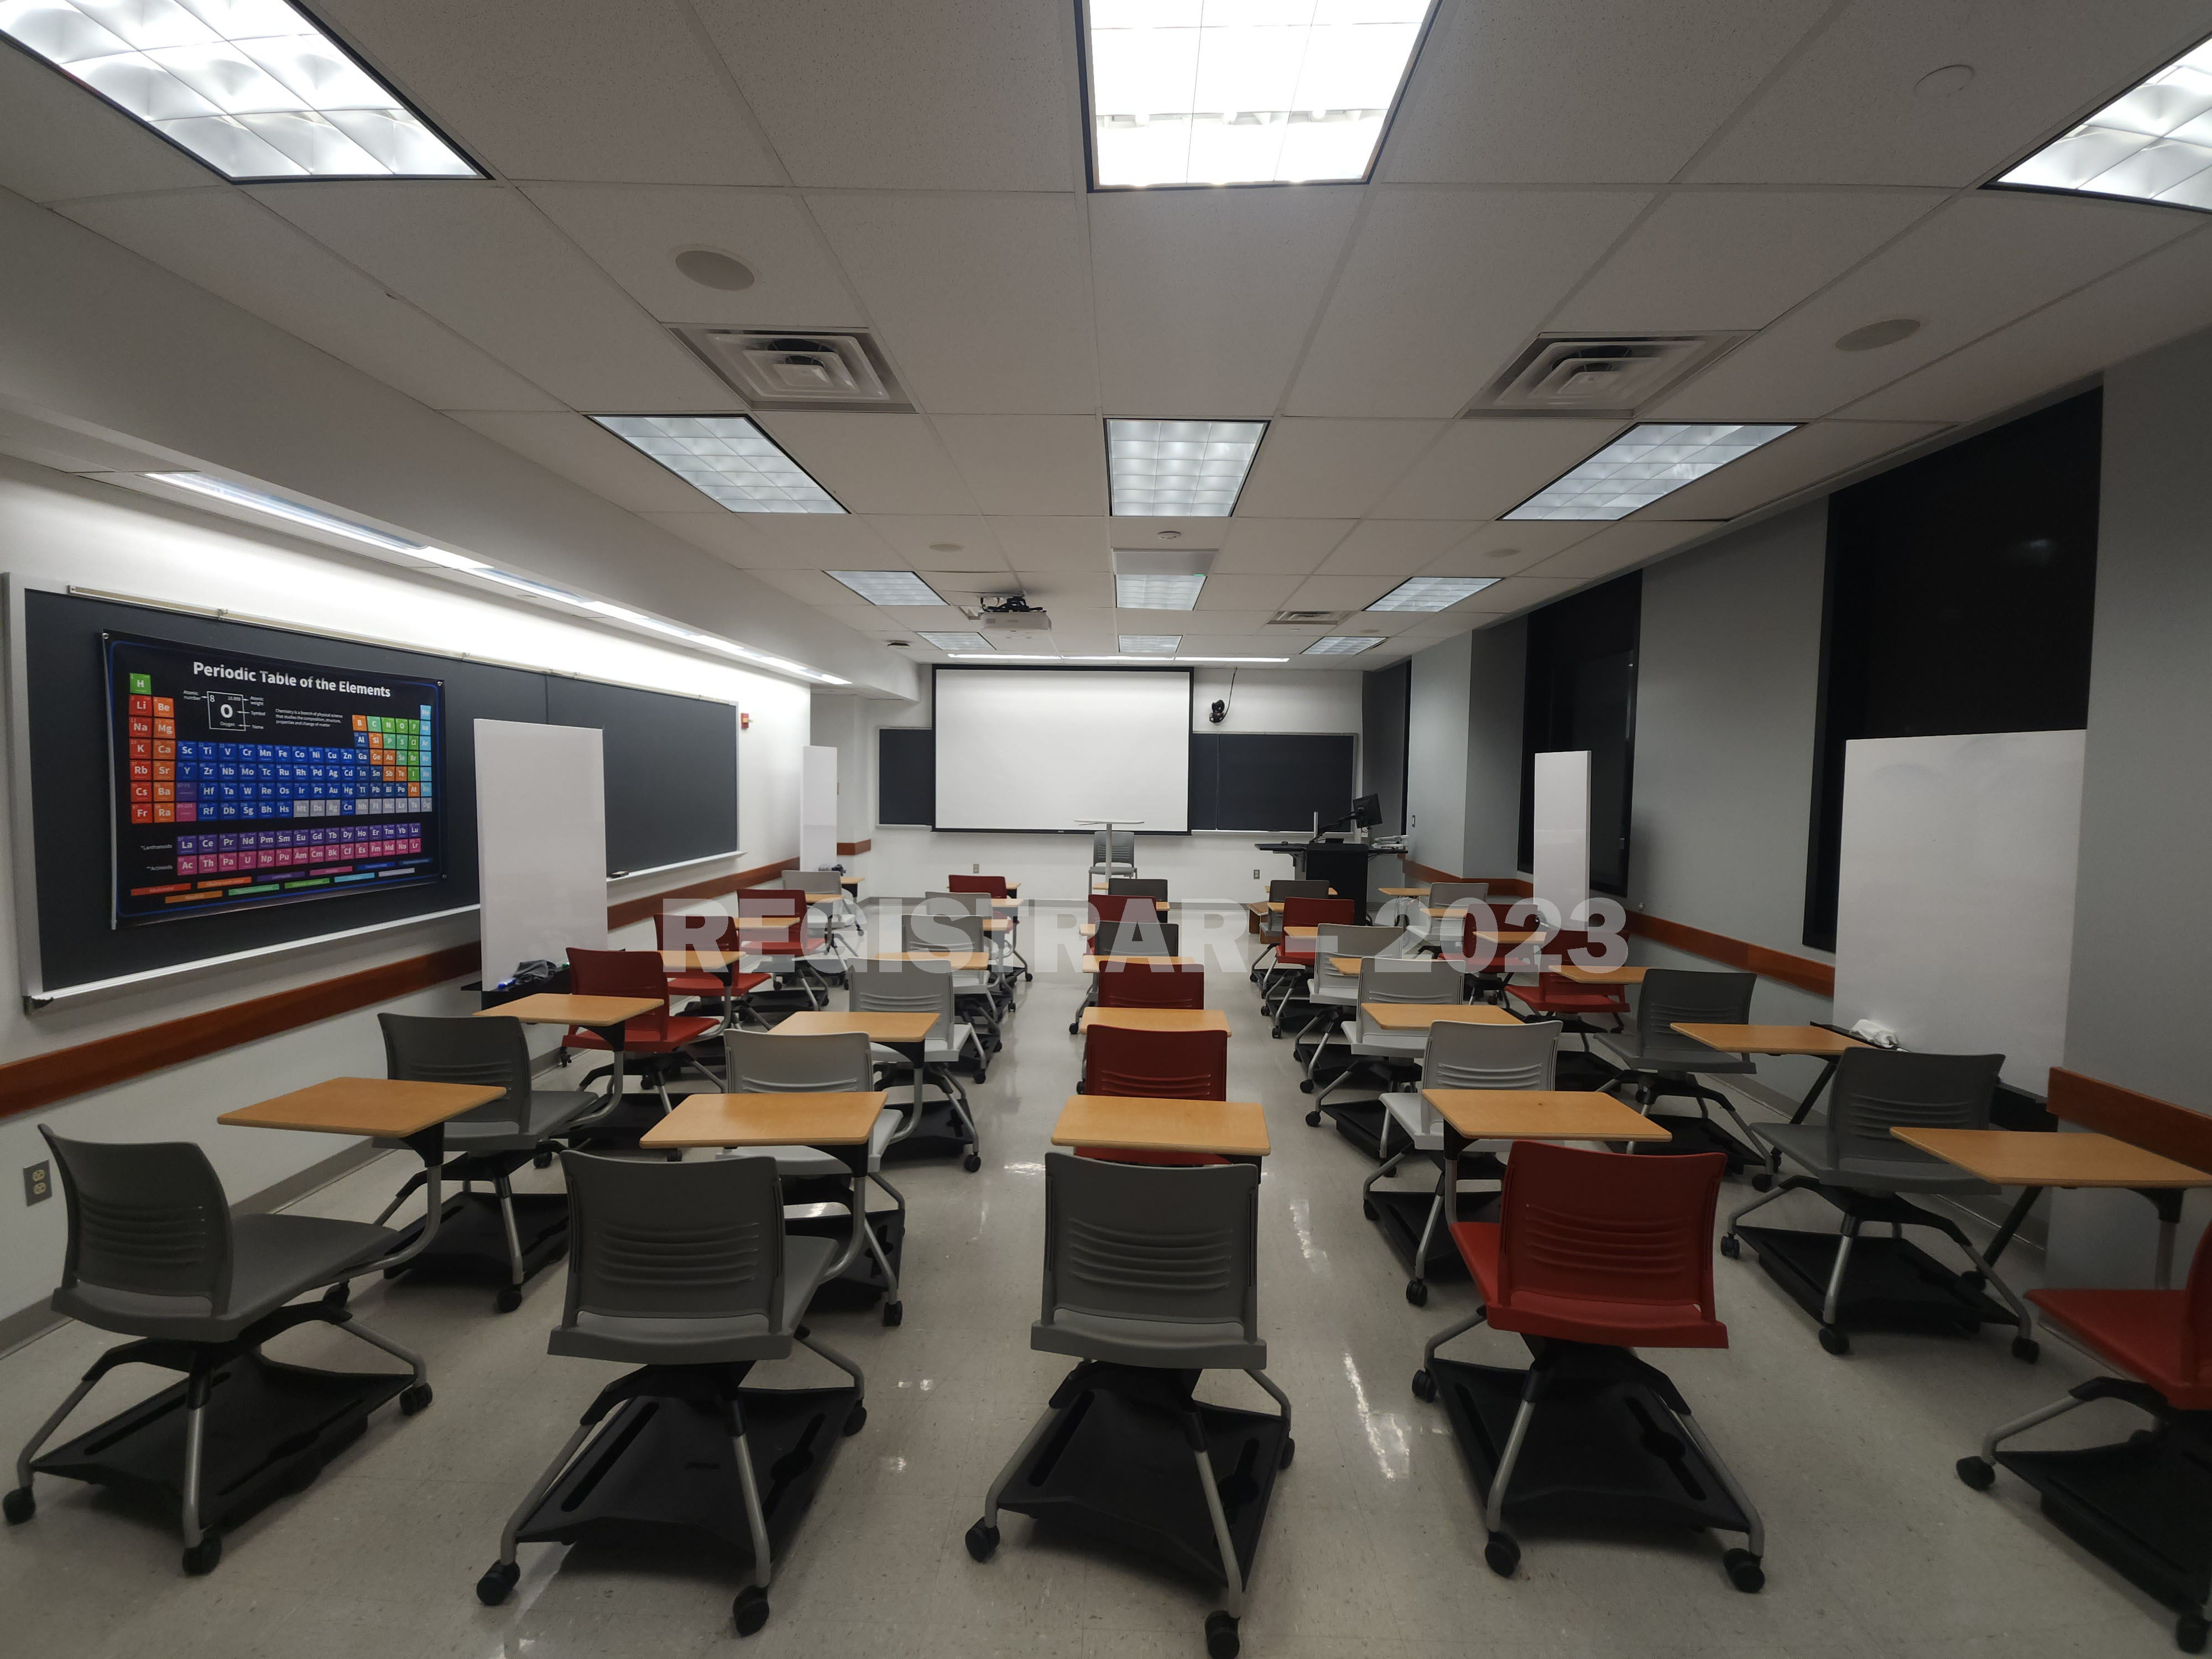 McPherson Chemical Lab room 1046 ultra wide view from the back of the room with projection screen down